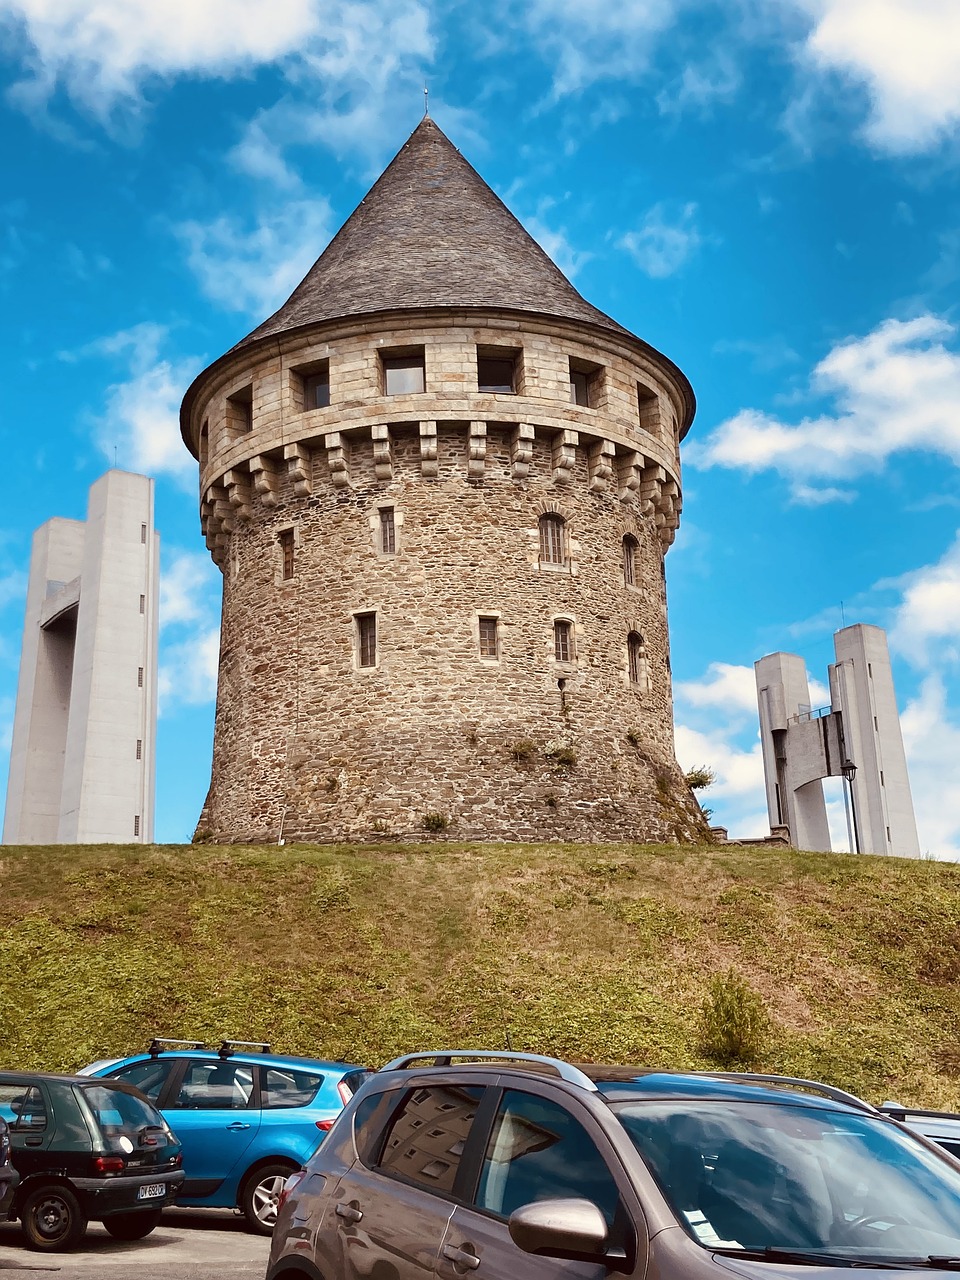 4-Day Adventure in Brest, France